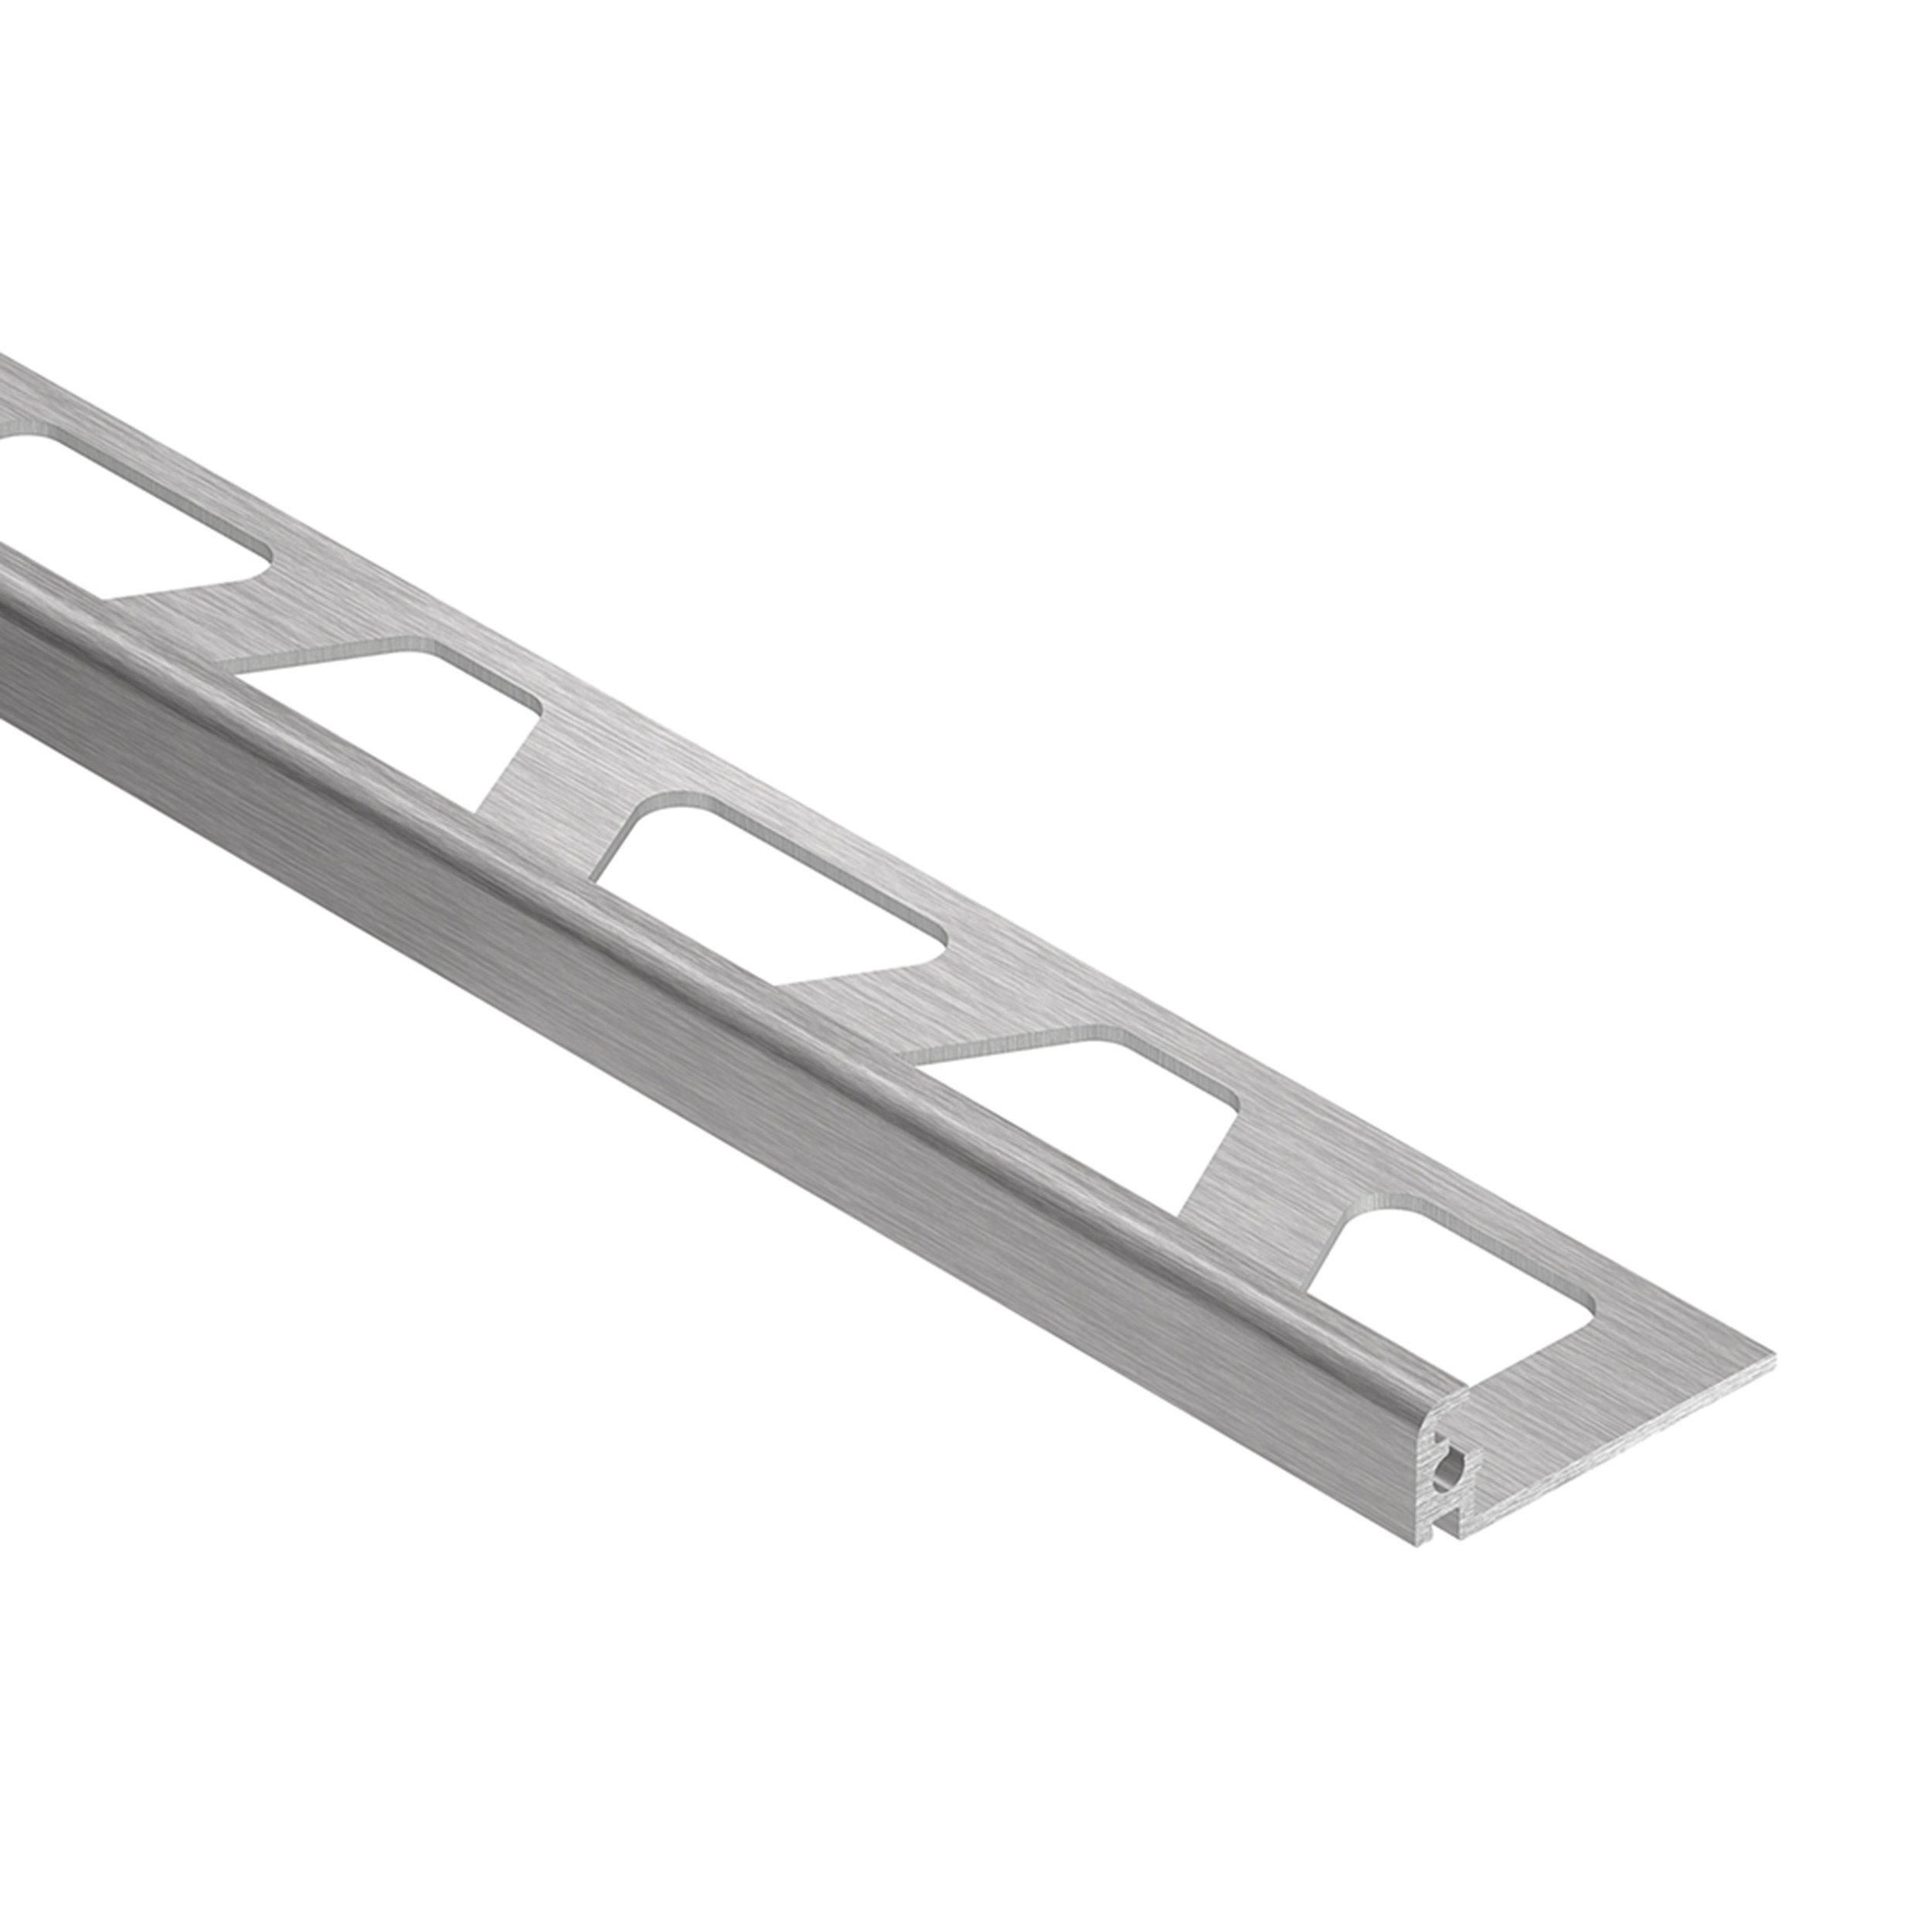 Schluter Jolly Edge Trim 1/4in. Anodized Aluminum Brushed Chrome